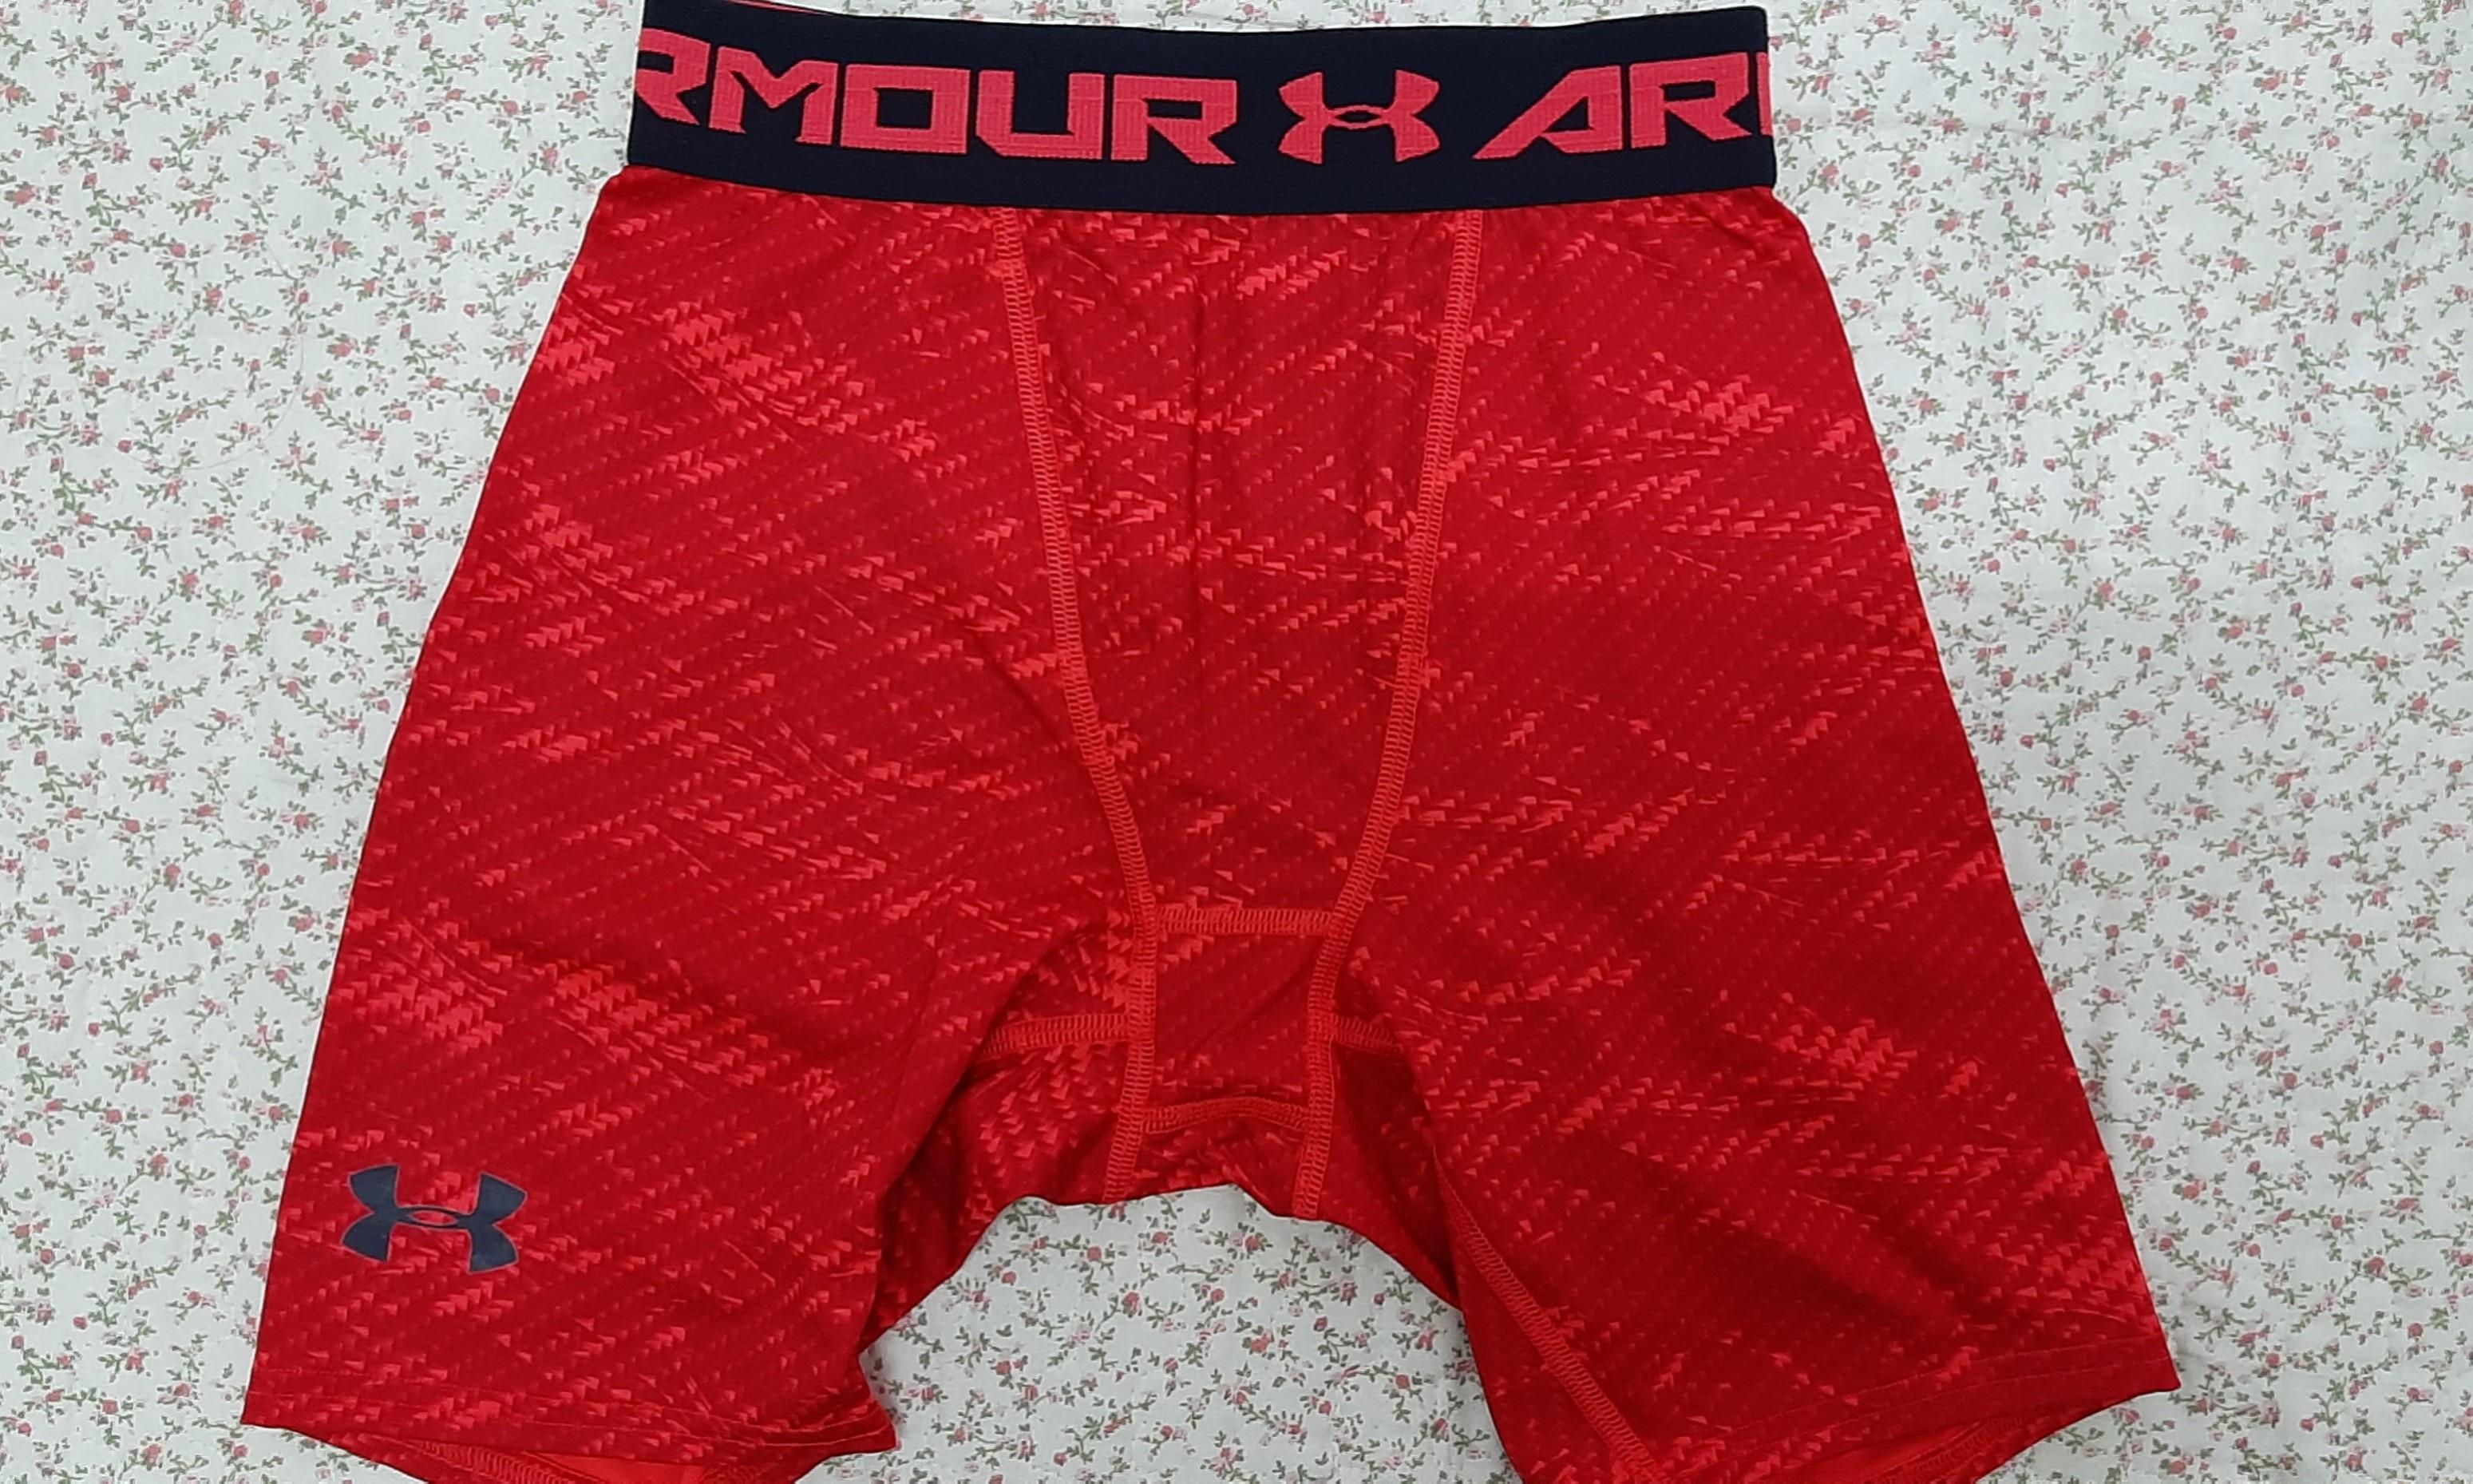 under armour red compression shorts